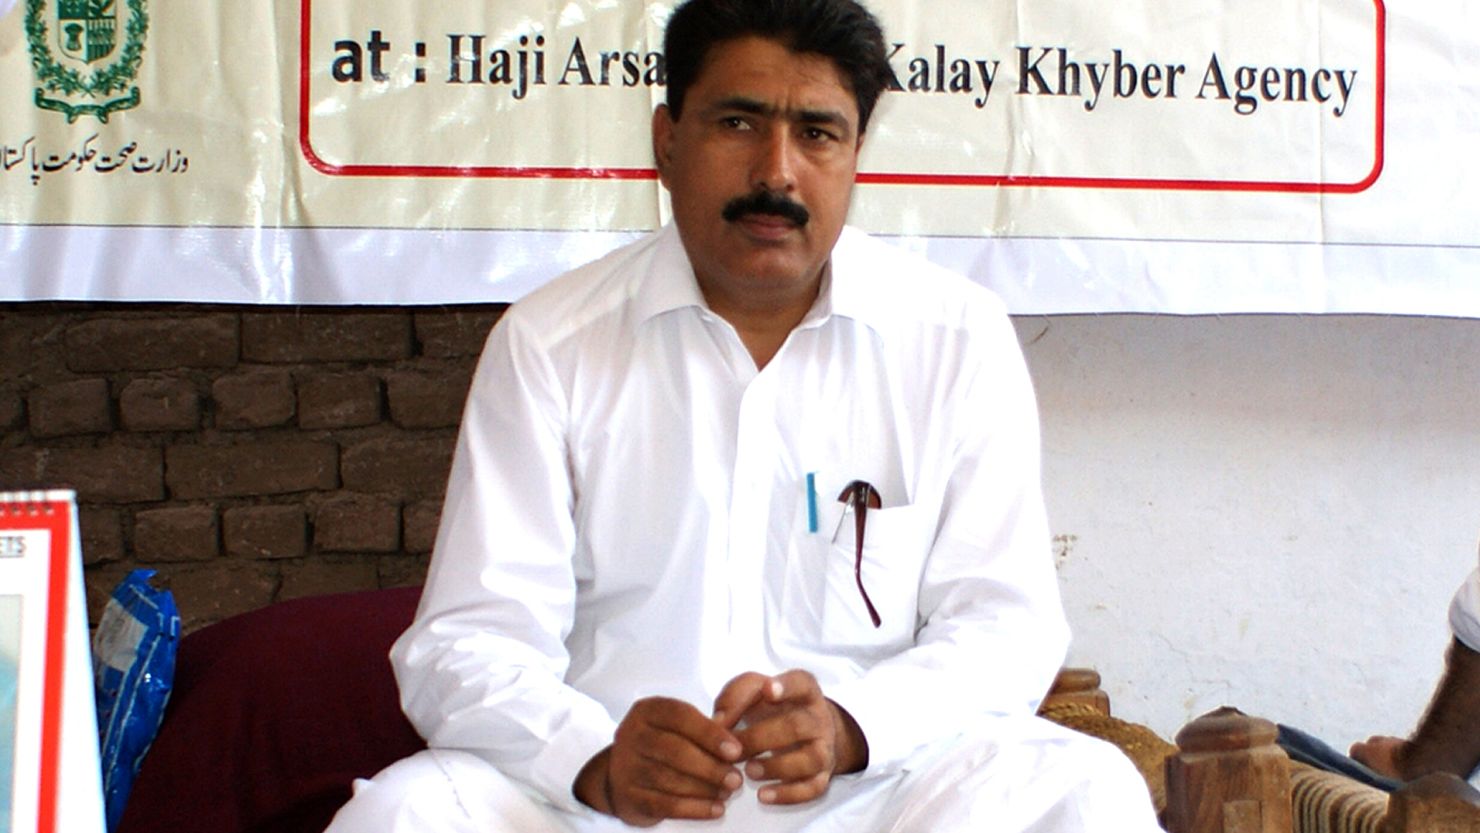 This photograph from 2010, shows Pakistani surgeon Shakeel Afridi, who was working for CIA to help find Osama bin Laden.